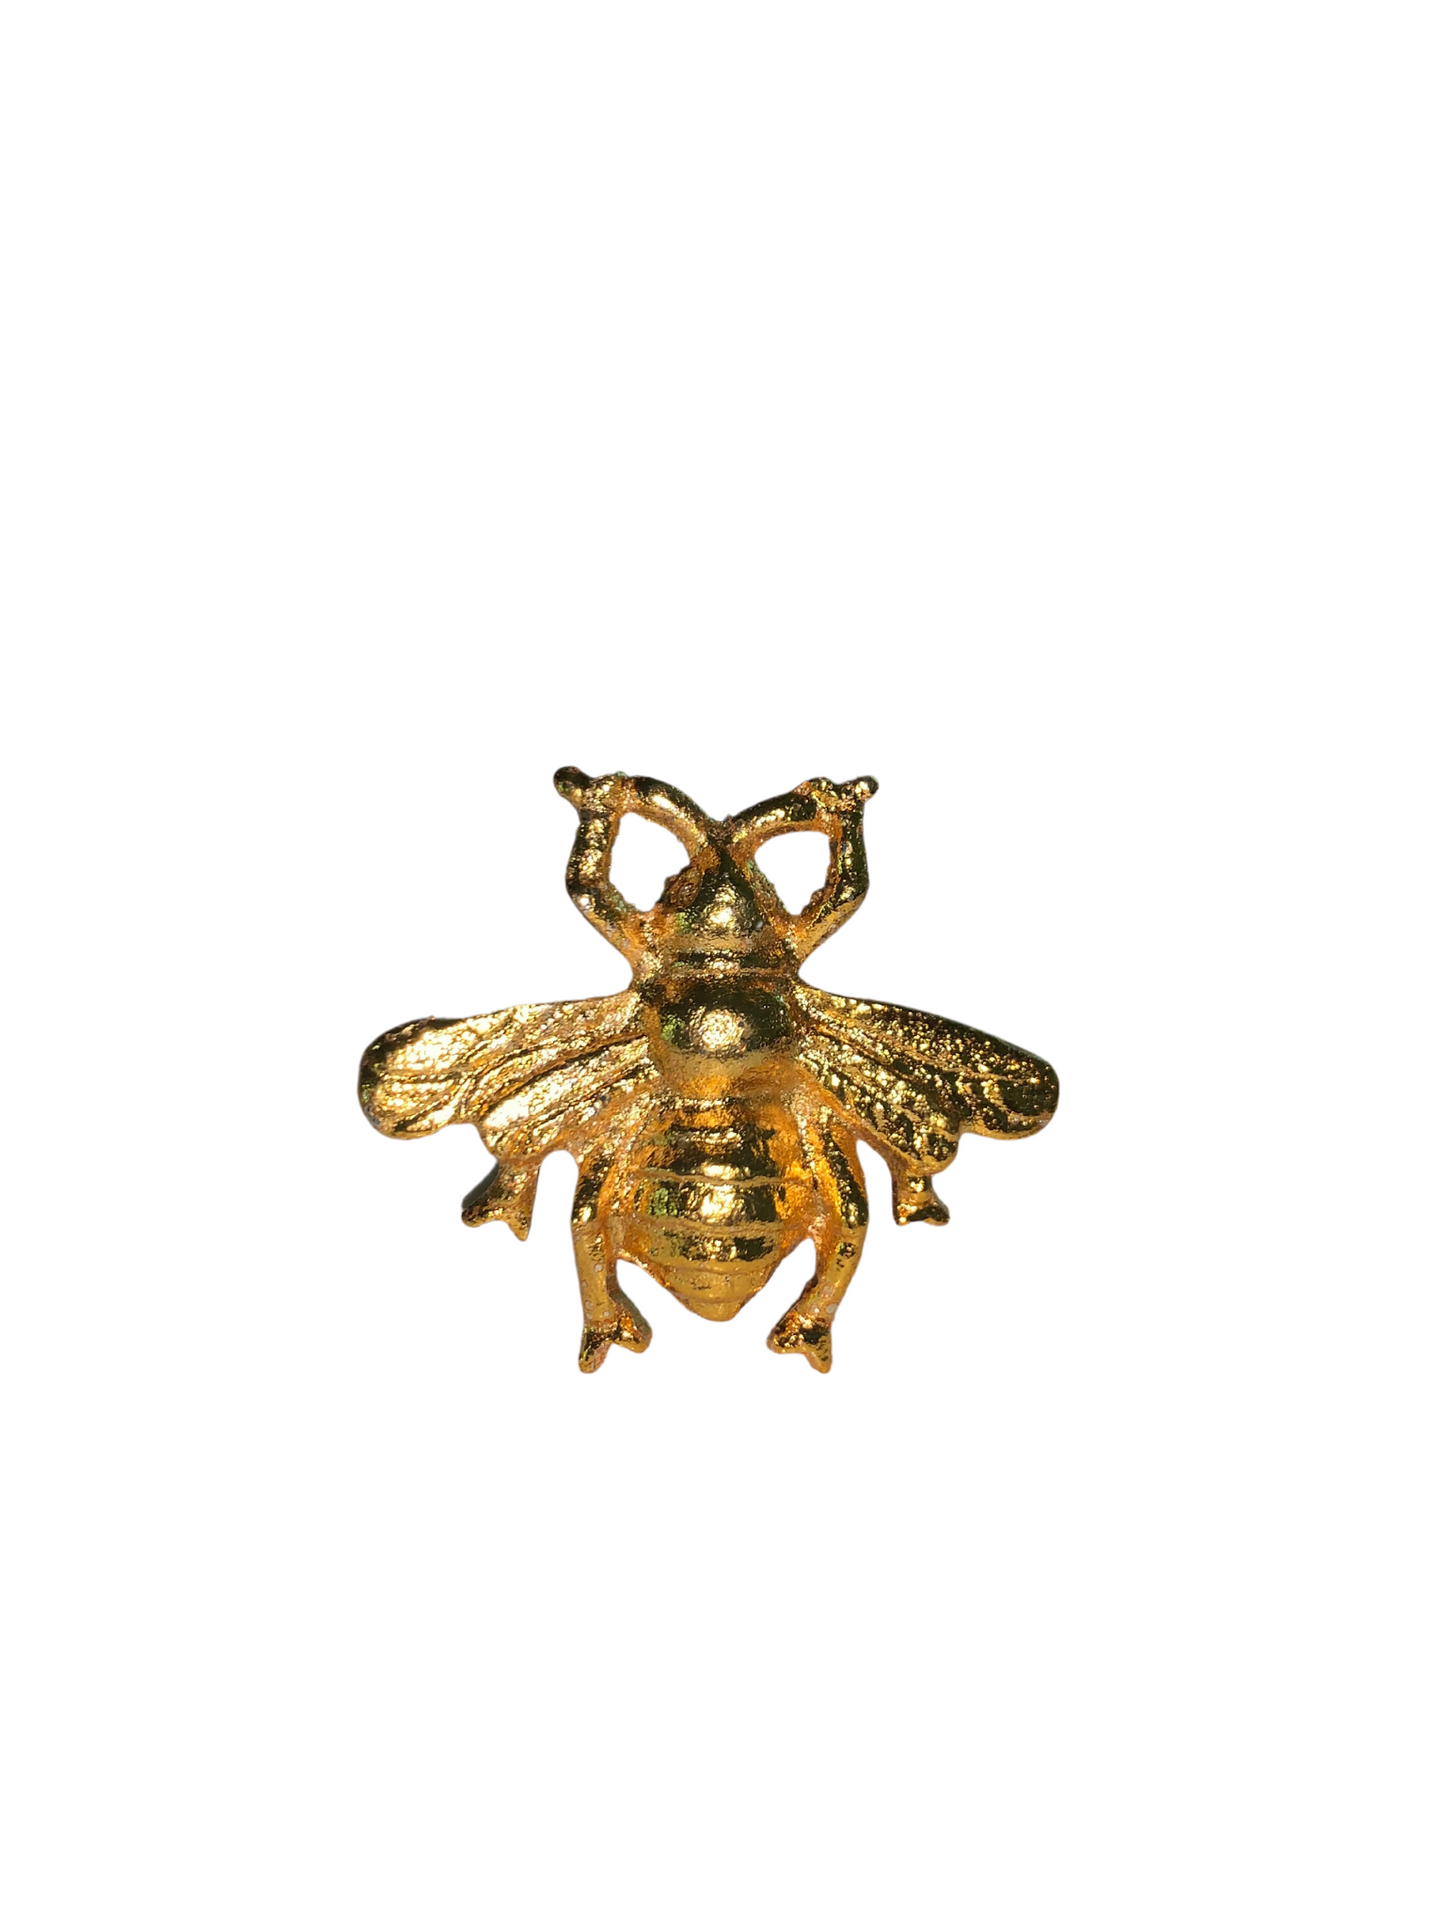 Copper Bee Drawer Knobs